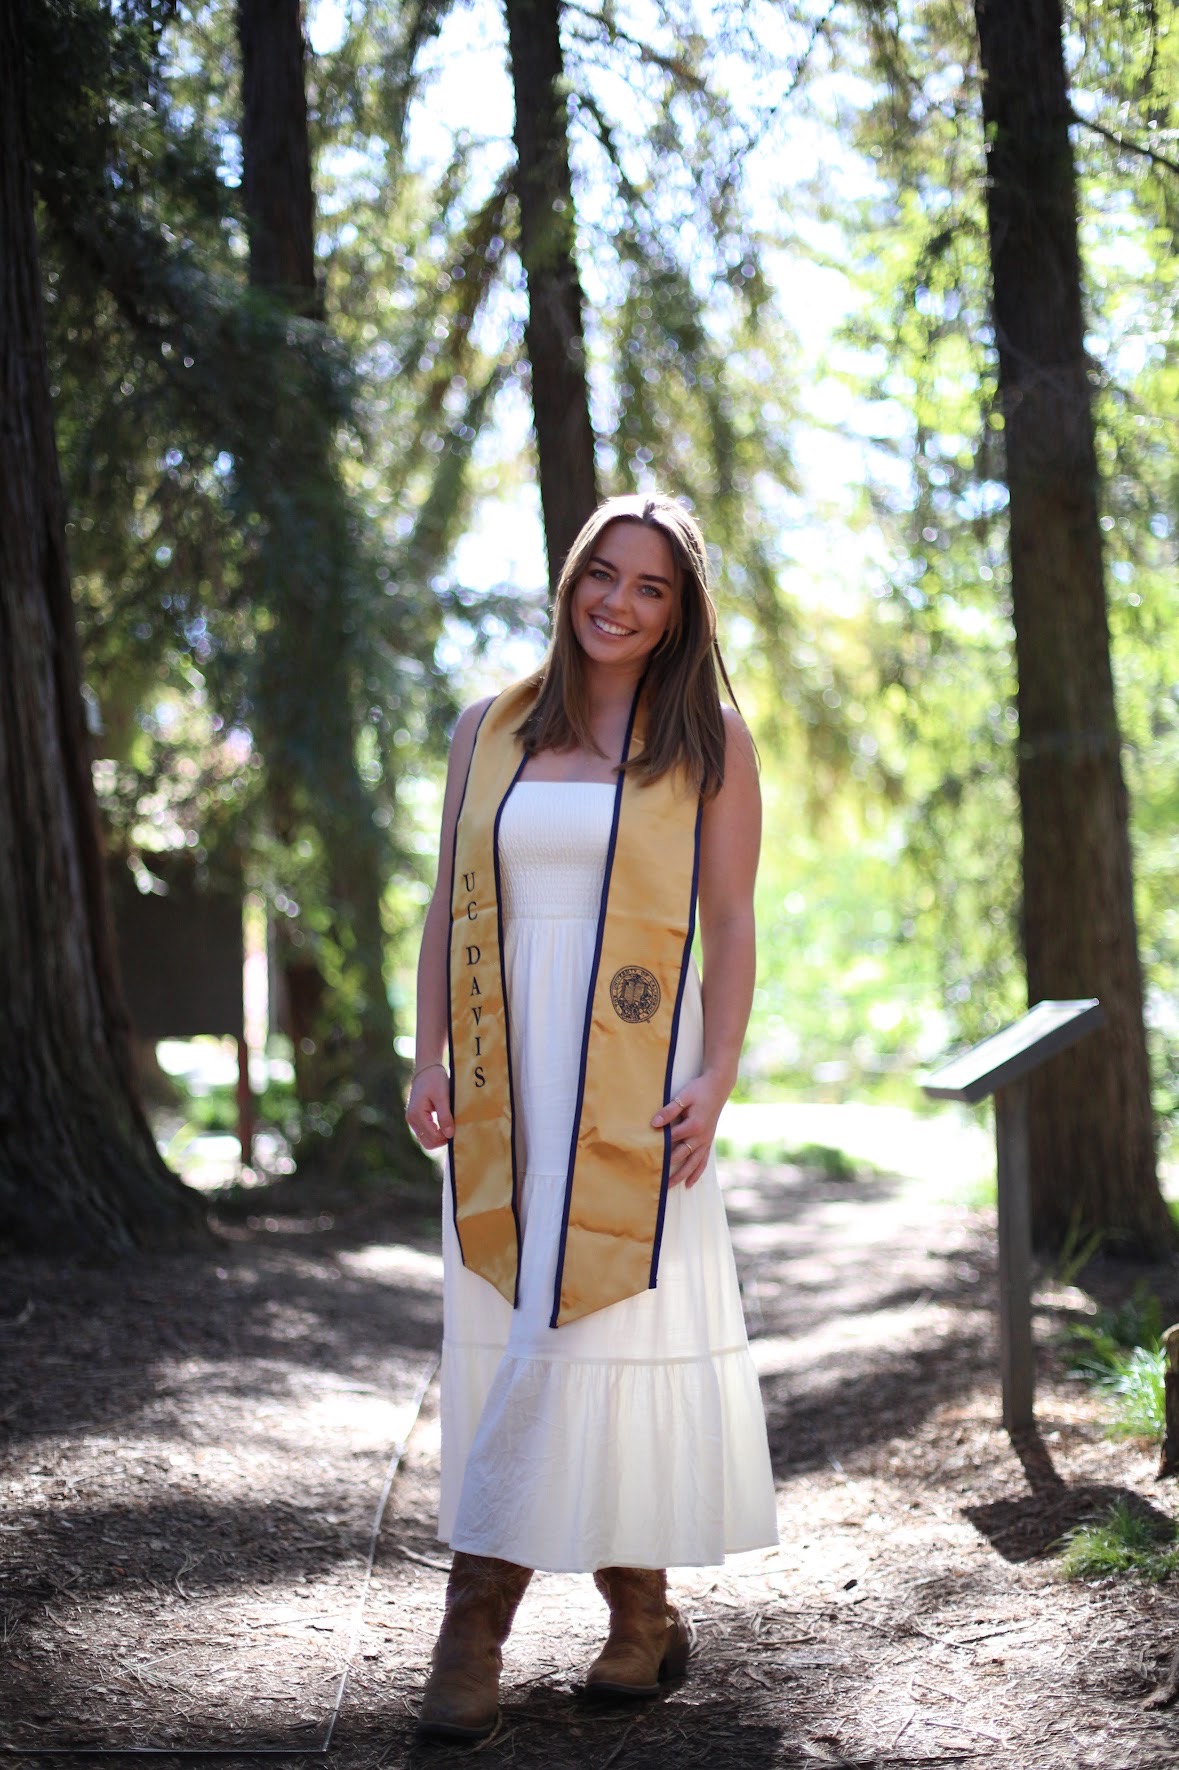 An image of a Maddie Wilmot standing in a redwood grove, wearing a white dress, boots, and a gold and blue UC Davis graduation shawl.